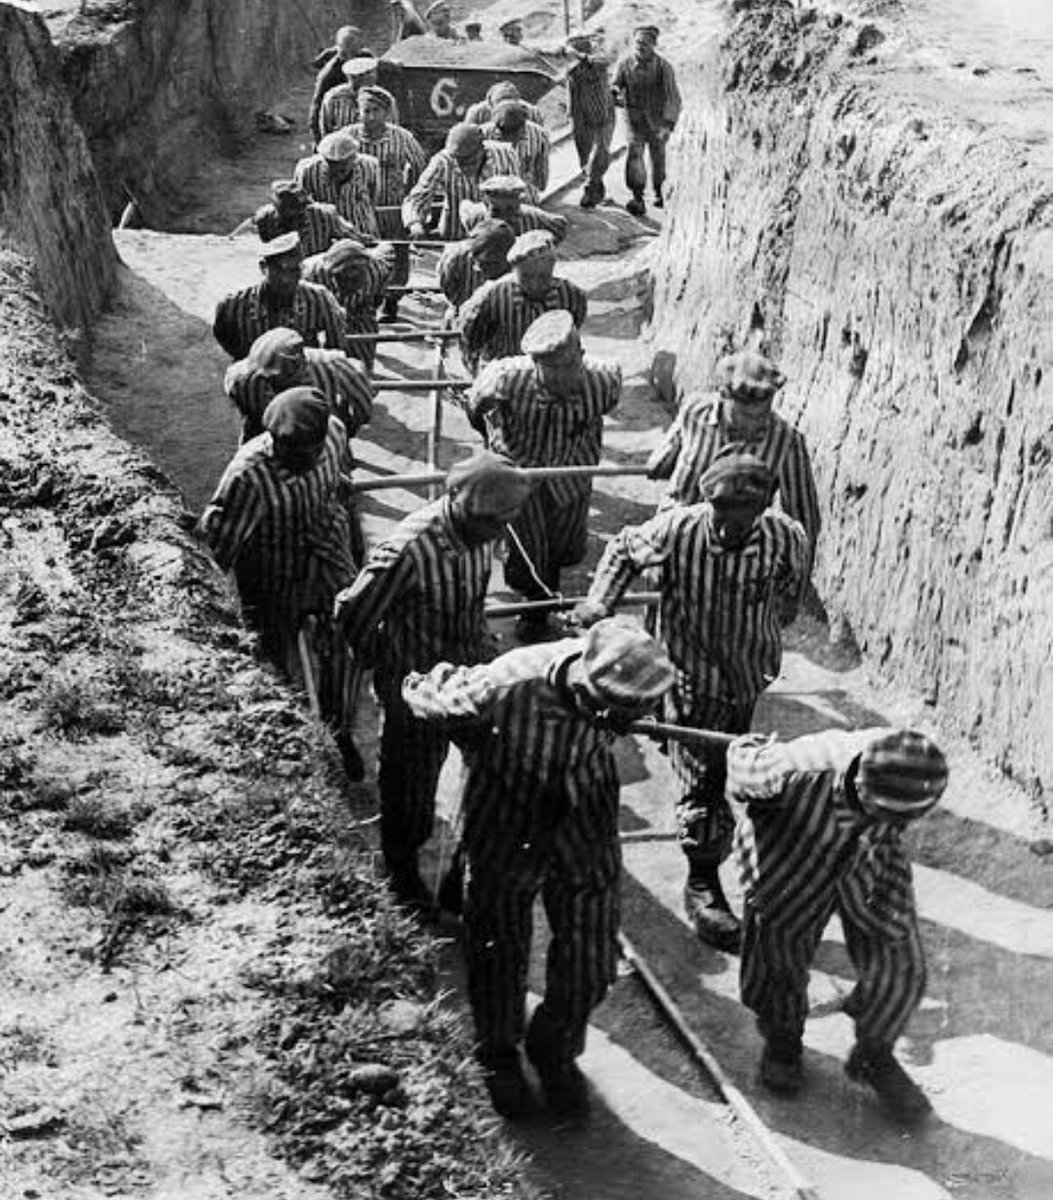 More than 30,000 Jewish men and teenagers b/w the ages of 16 and 60 which constituted 10% of the entire Jewish community in Germany at that time were arrested and shipped to 3 concentration camps: Sachsenhausen (near Berlin), Buchenwald (near Erfurt), and Dachau (near Munich).